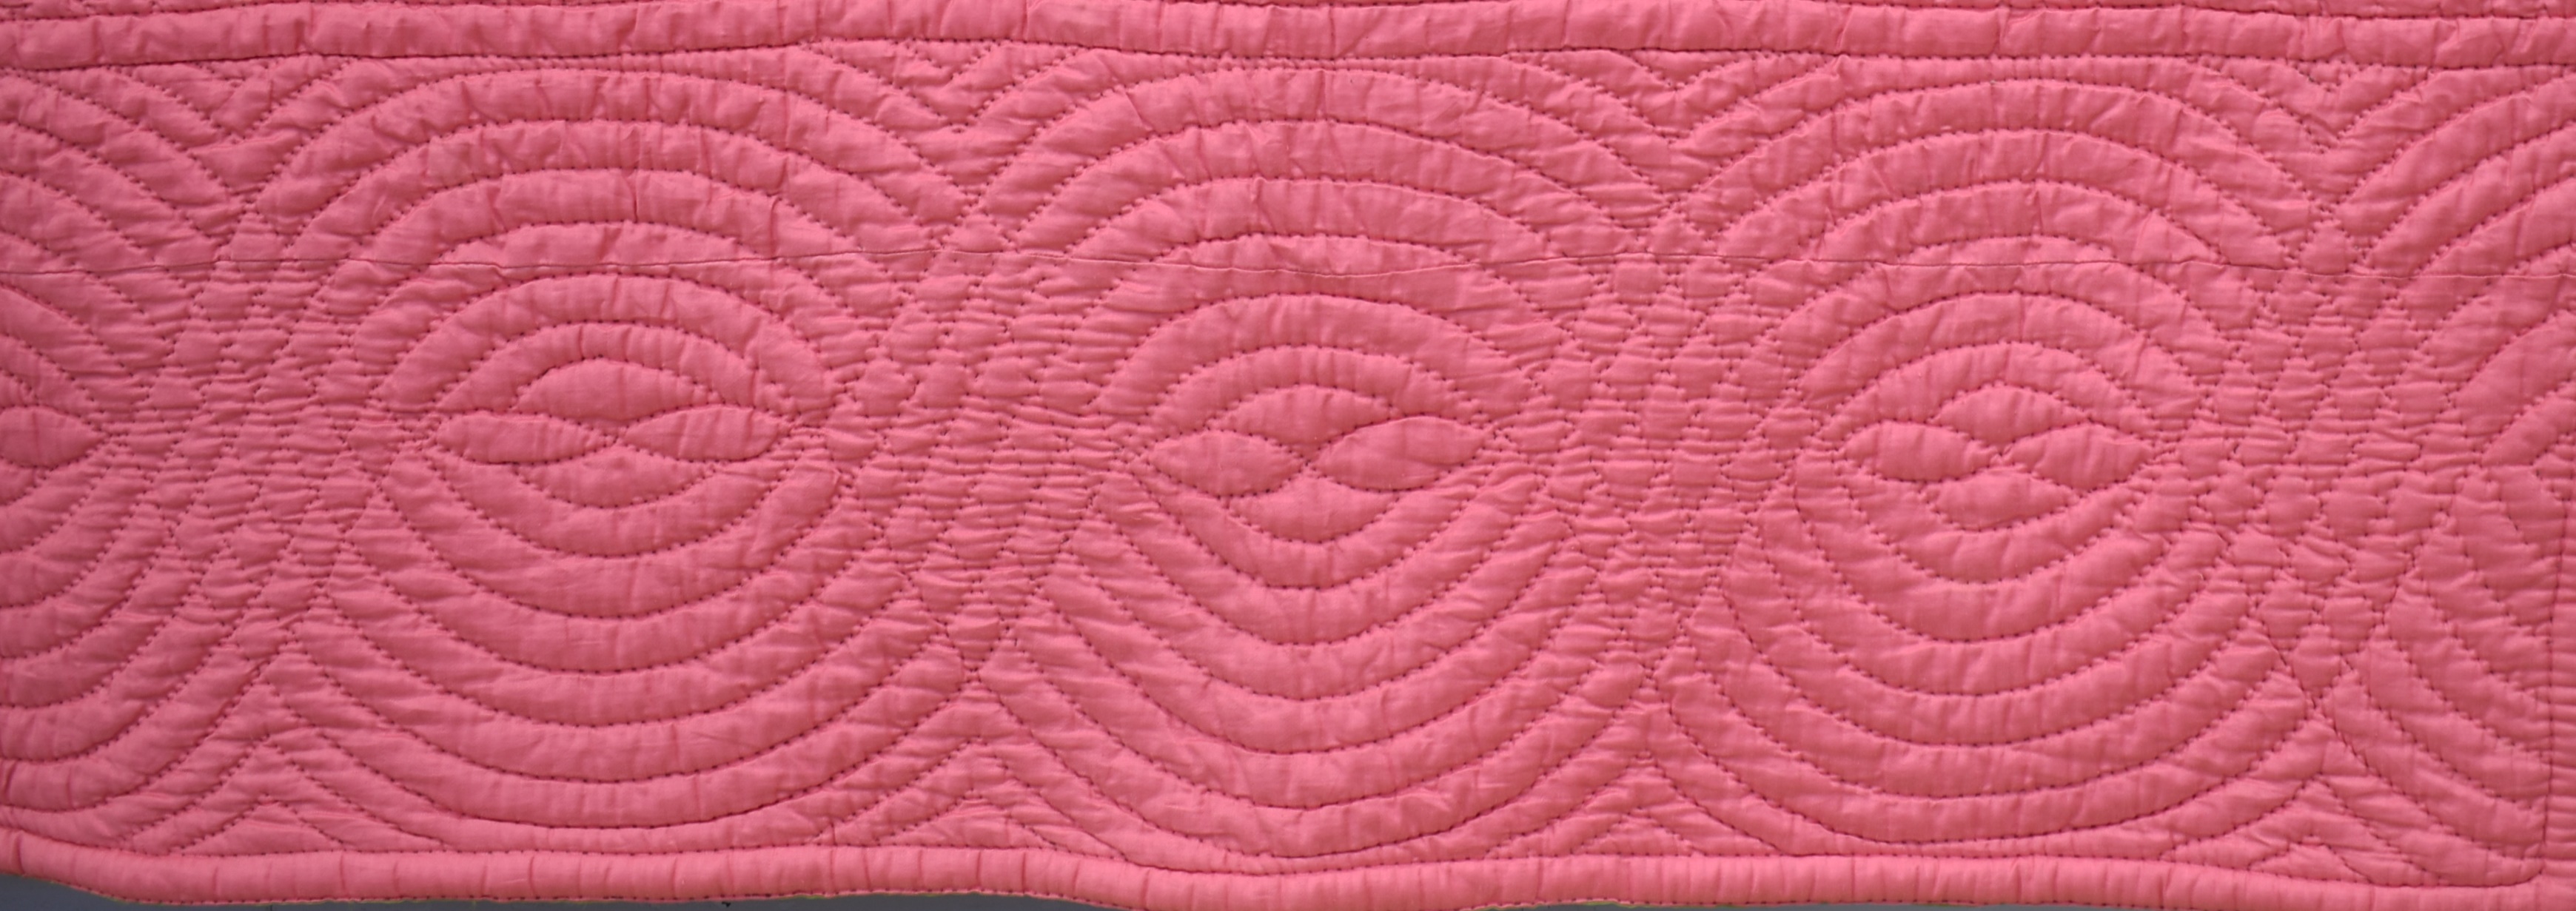 Pink quilt border with cable design